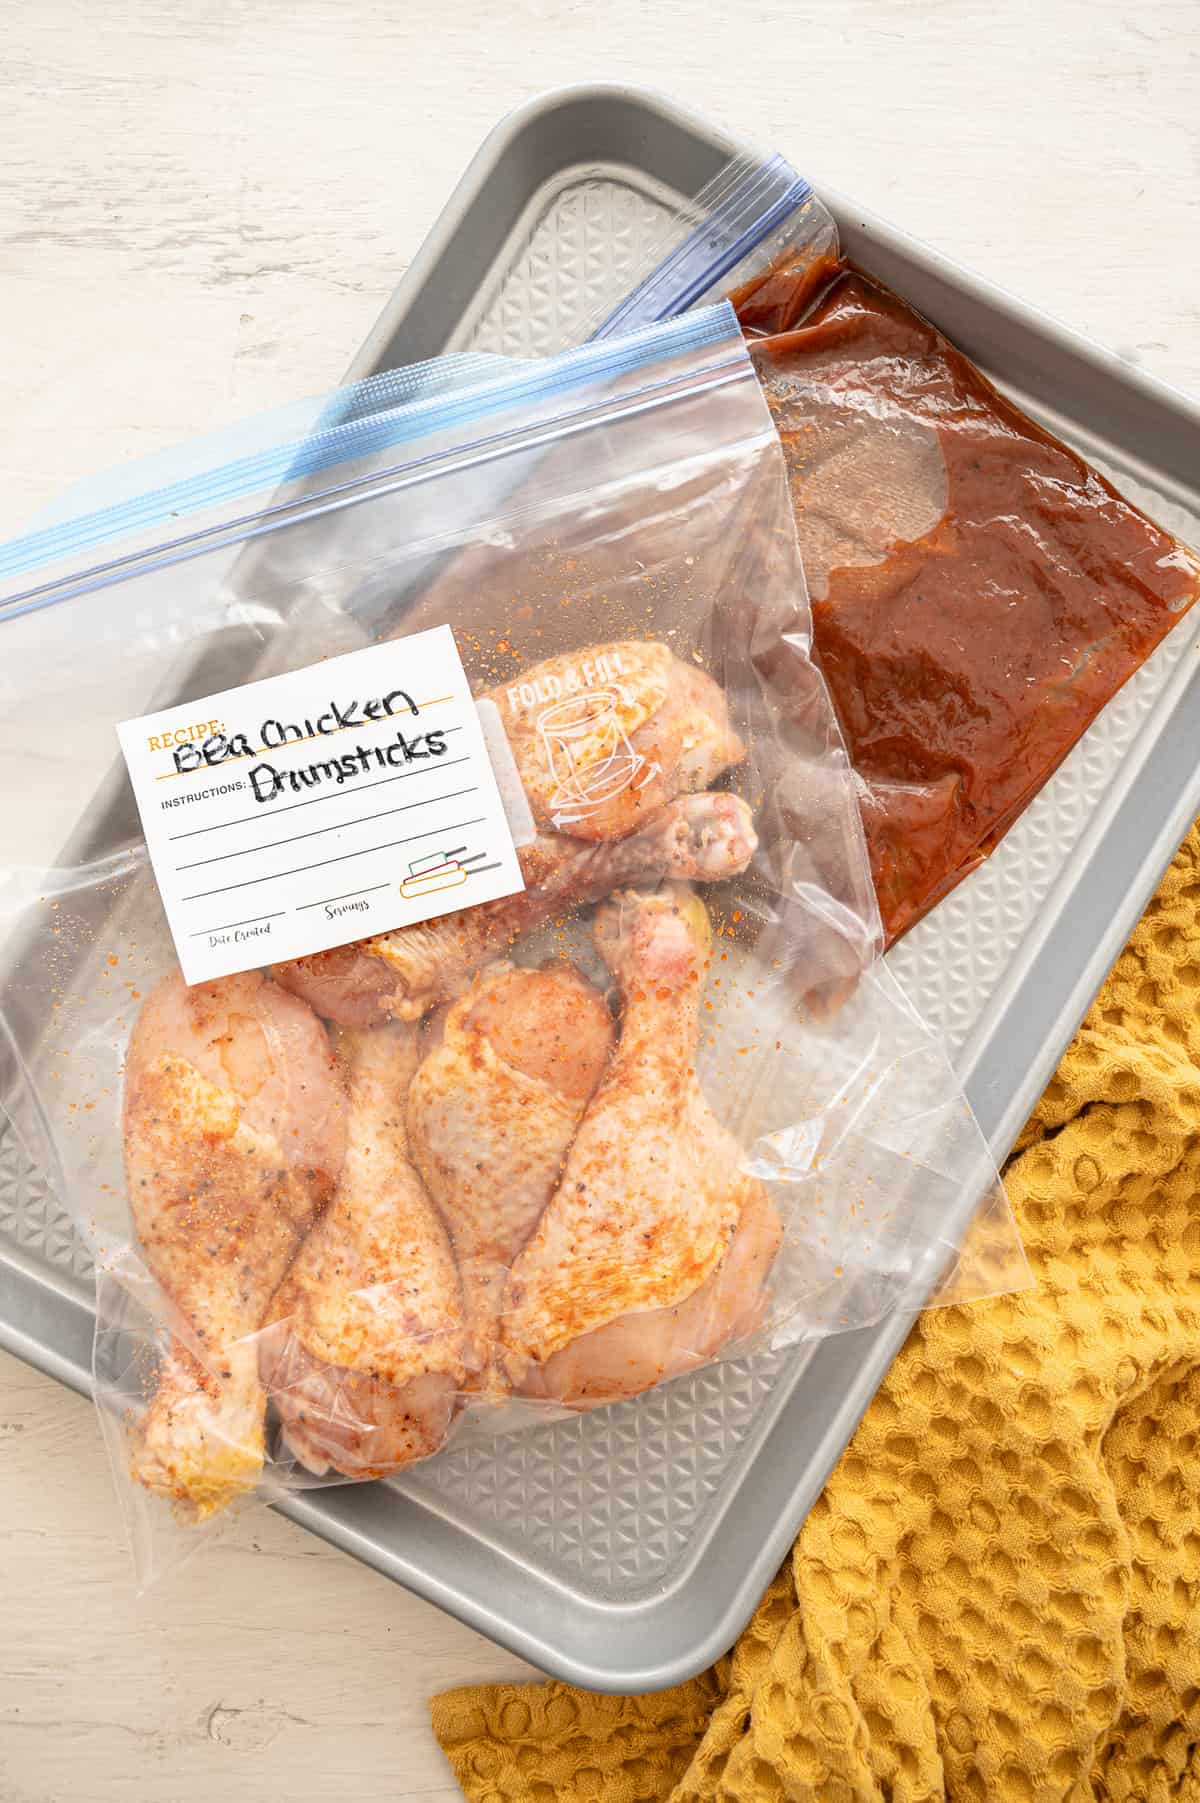 Chicken drumsticks with dry rub in a gallon-size freezer bag with a smaller bag of BBQ sauce laid on a baking sheet.